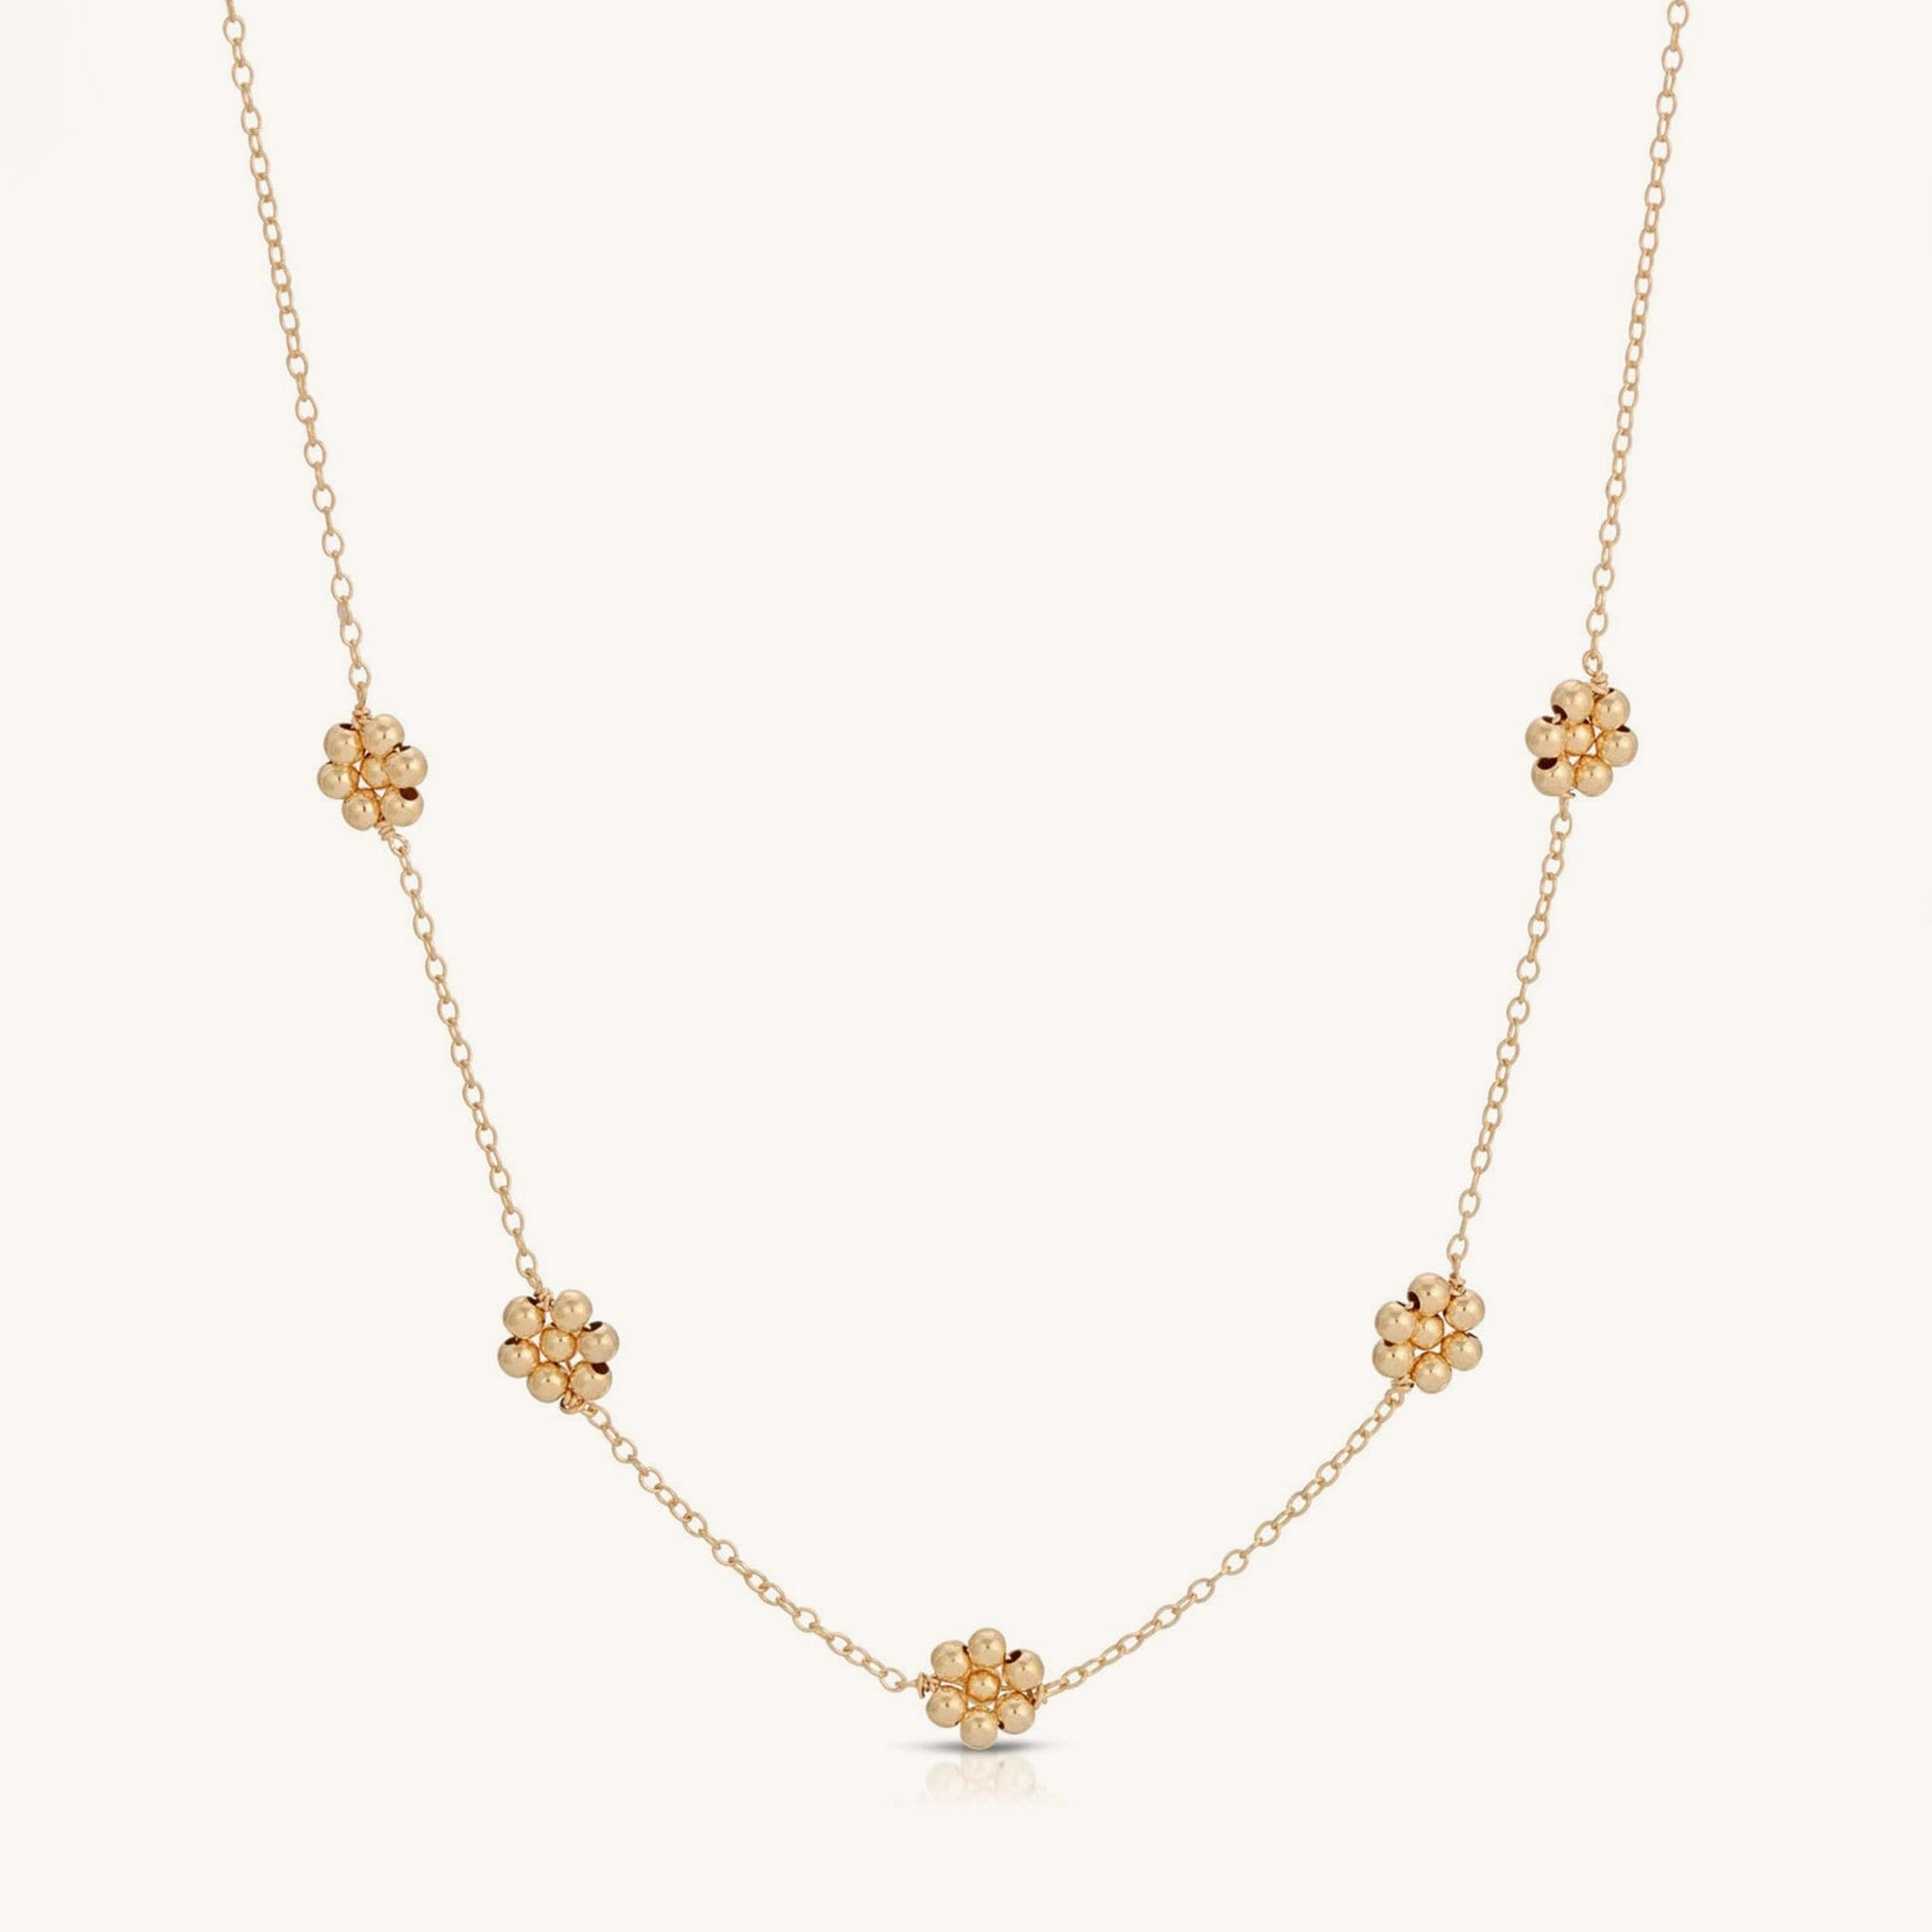 Gold chain necklace with five spaced out beaded flower details.